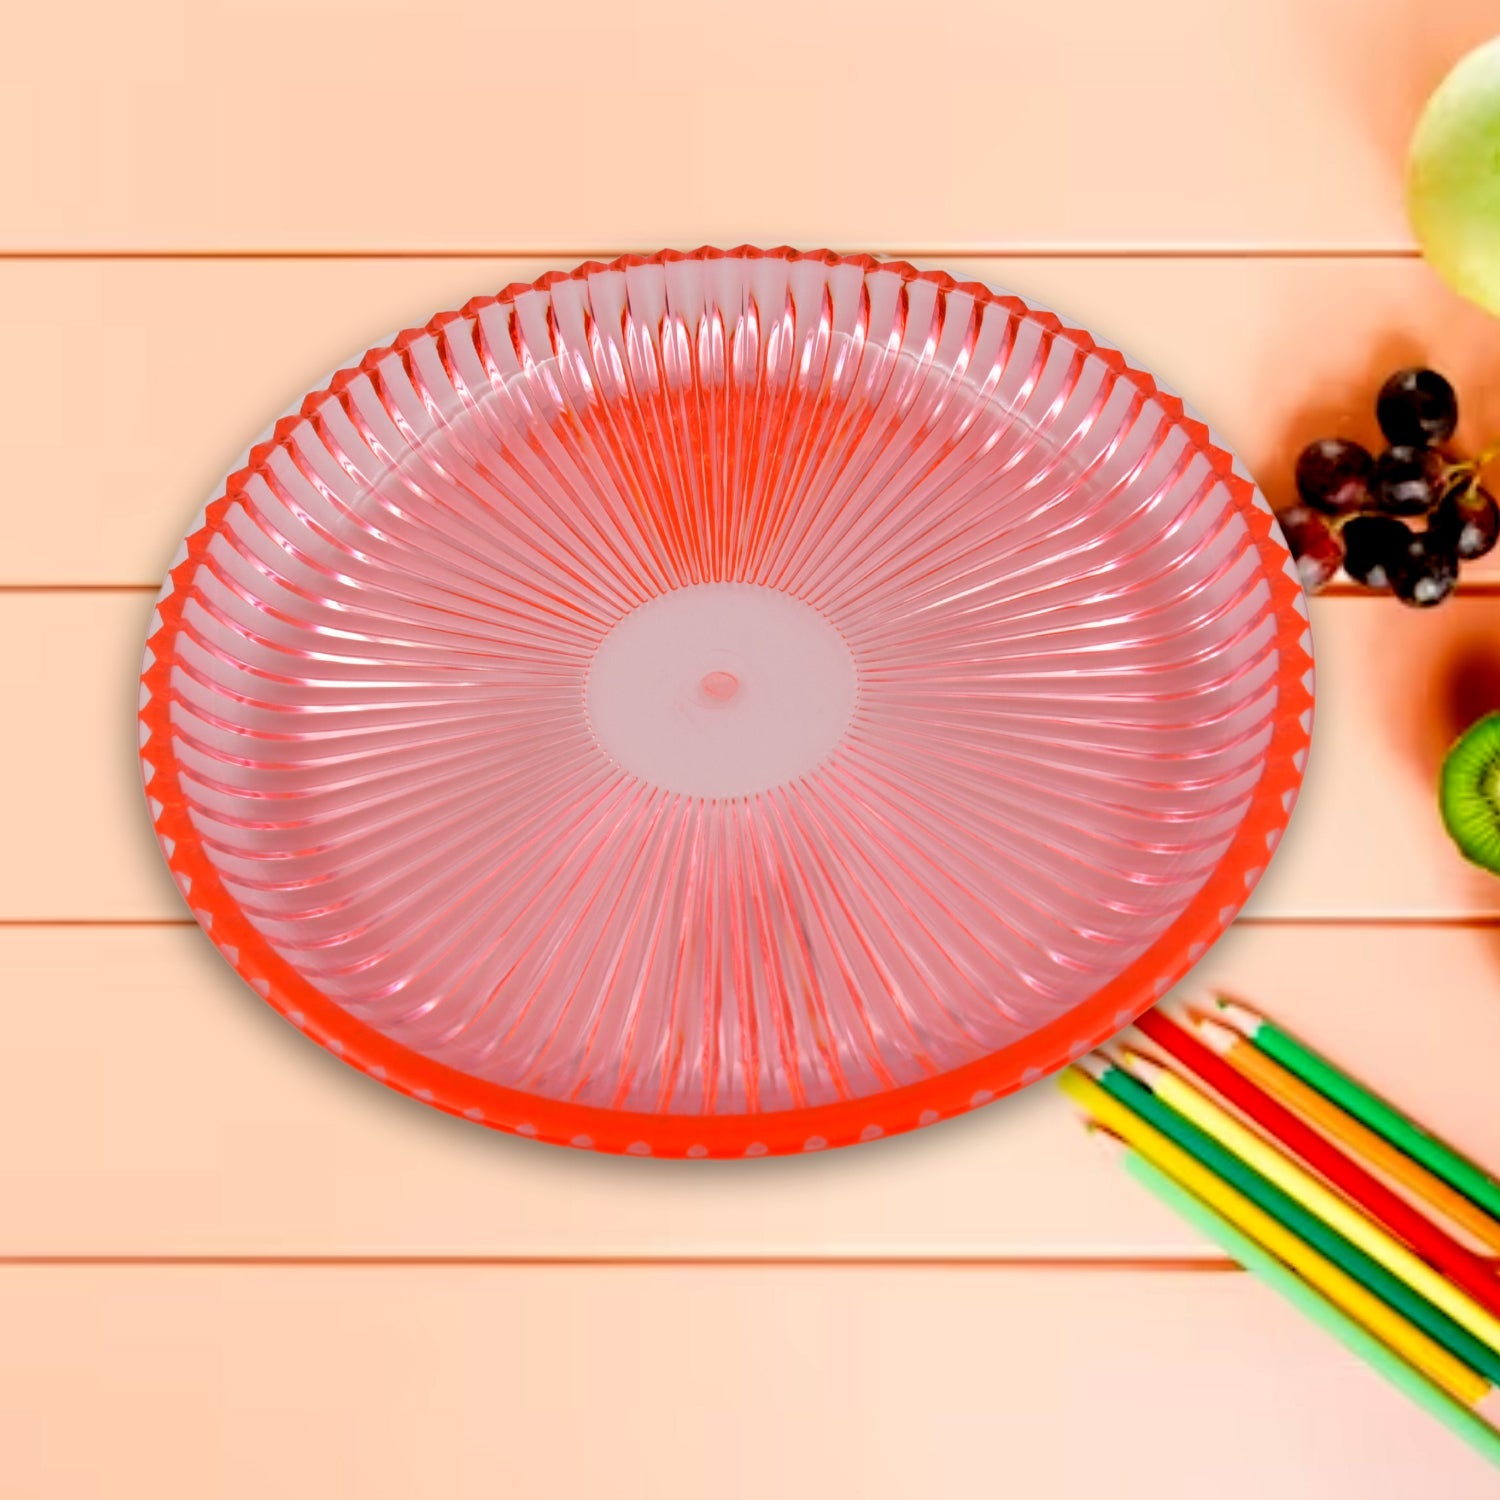 Round Plastic Dinner Plate  / Tray / Snacks / Breakfast Plate friendly Plastic Plate for Kids Party Supplies Birthday Holiday Party Dinnerware Supplies (1 Pc)